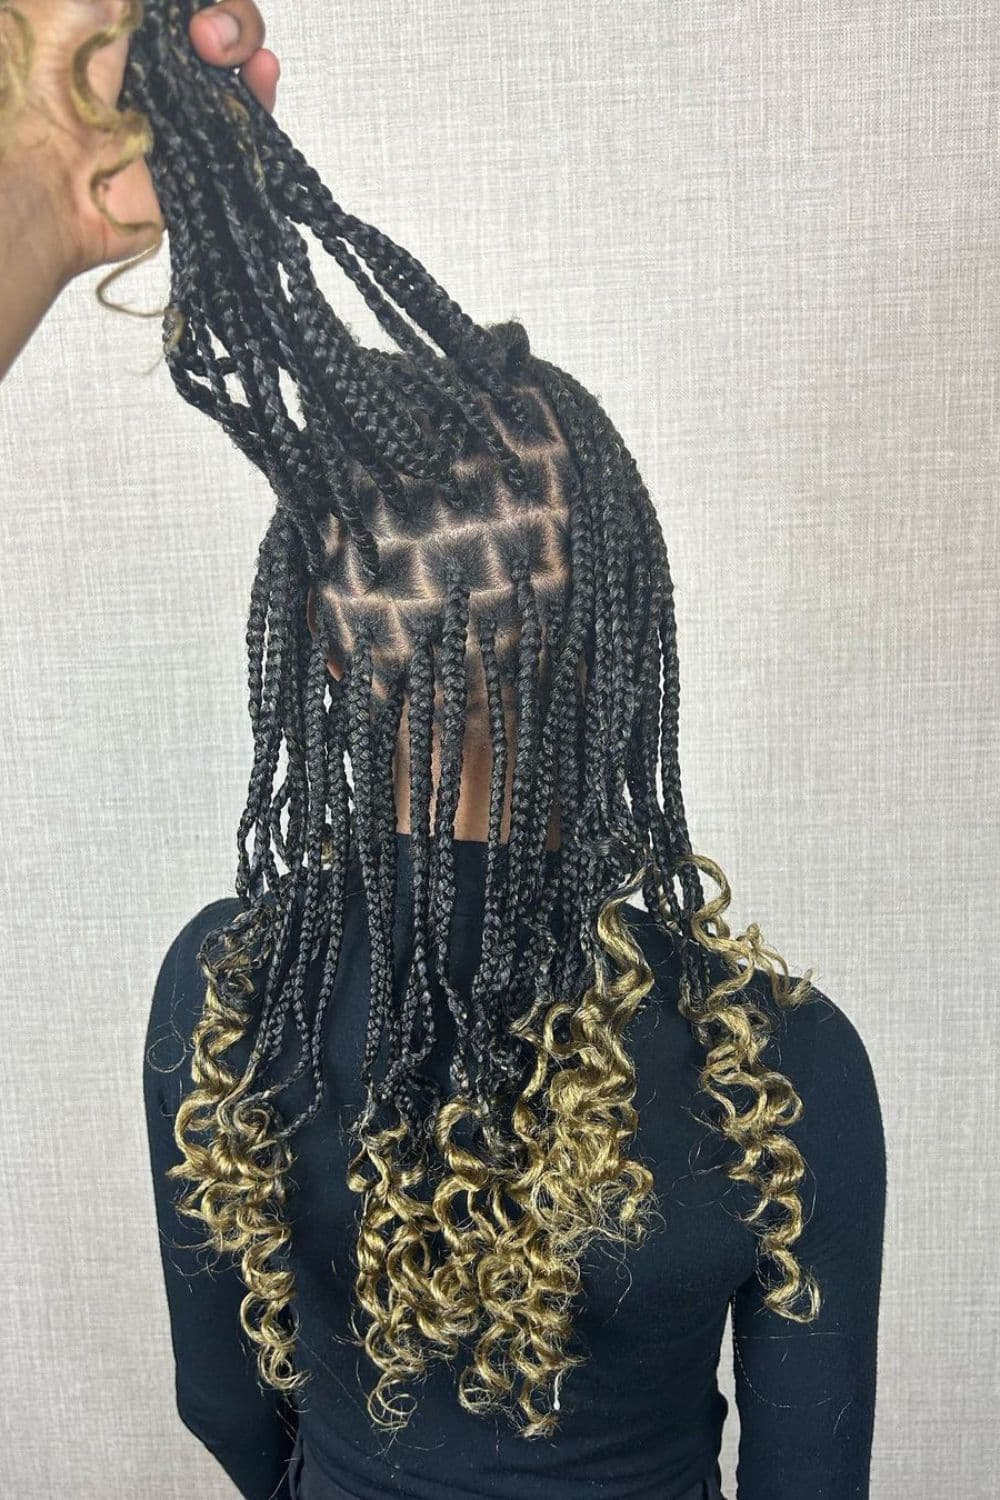 A woman wearing black long sleeves with black medium knotless box braids and blonde curly ends.